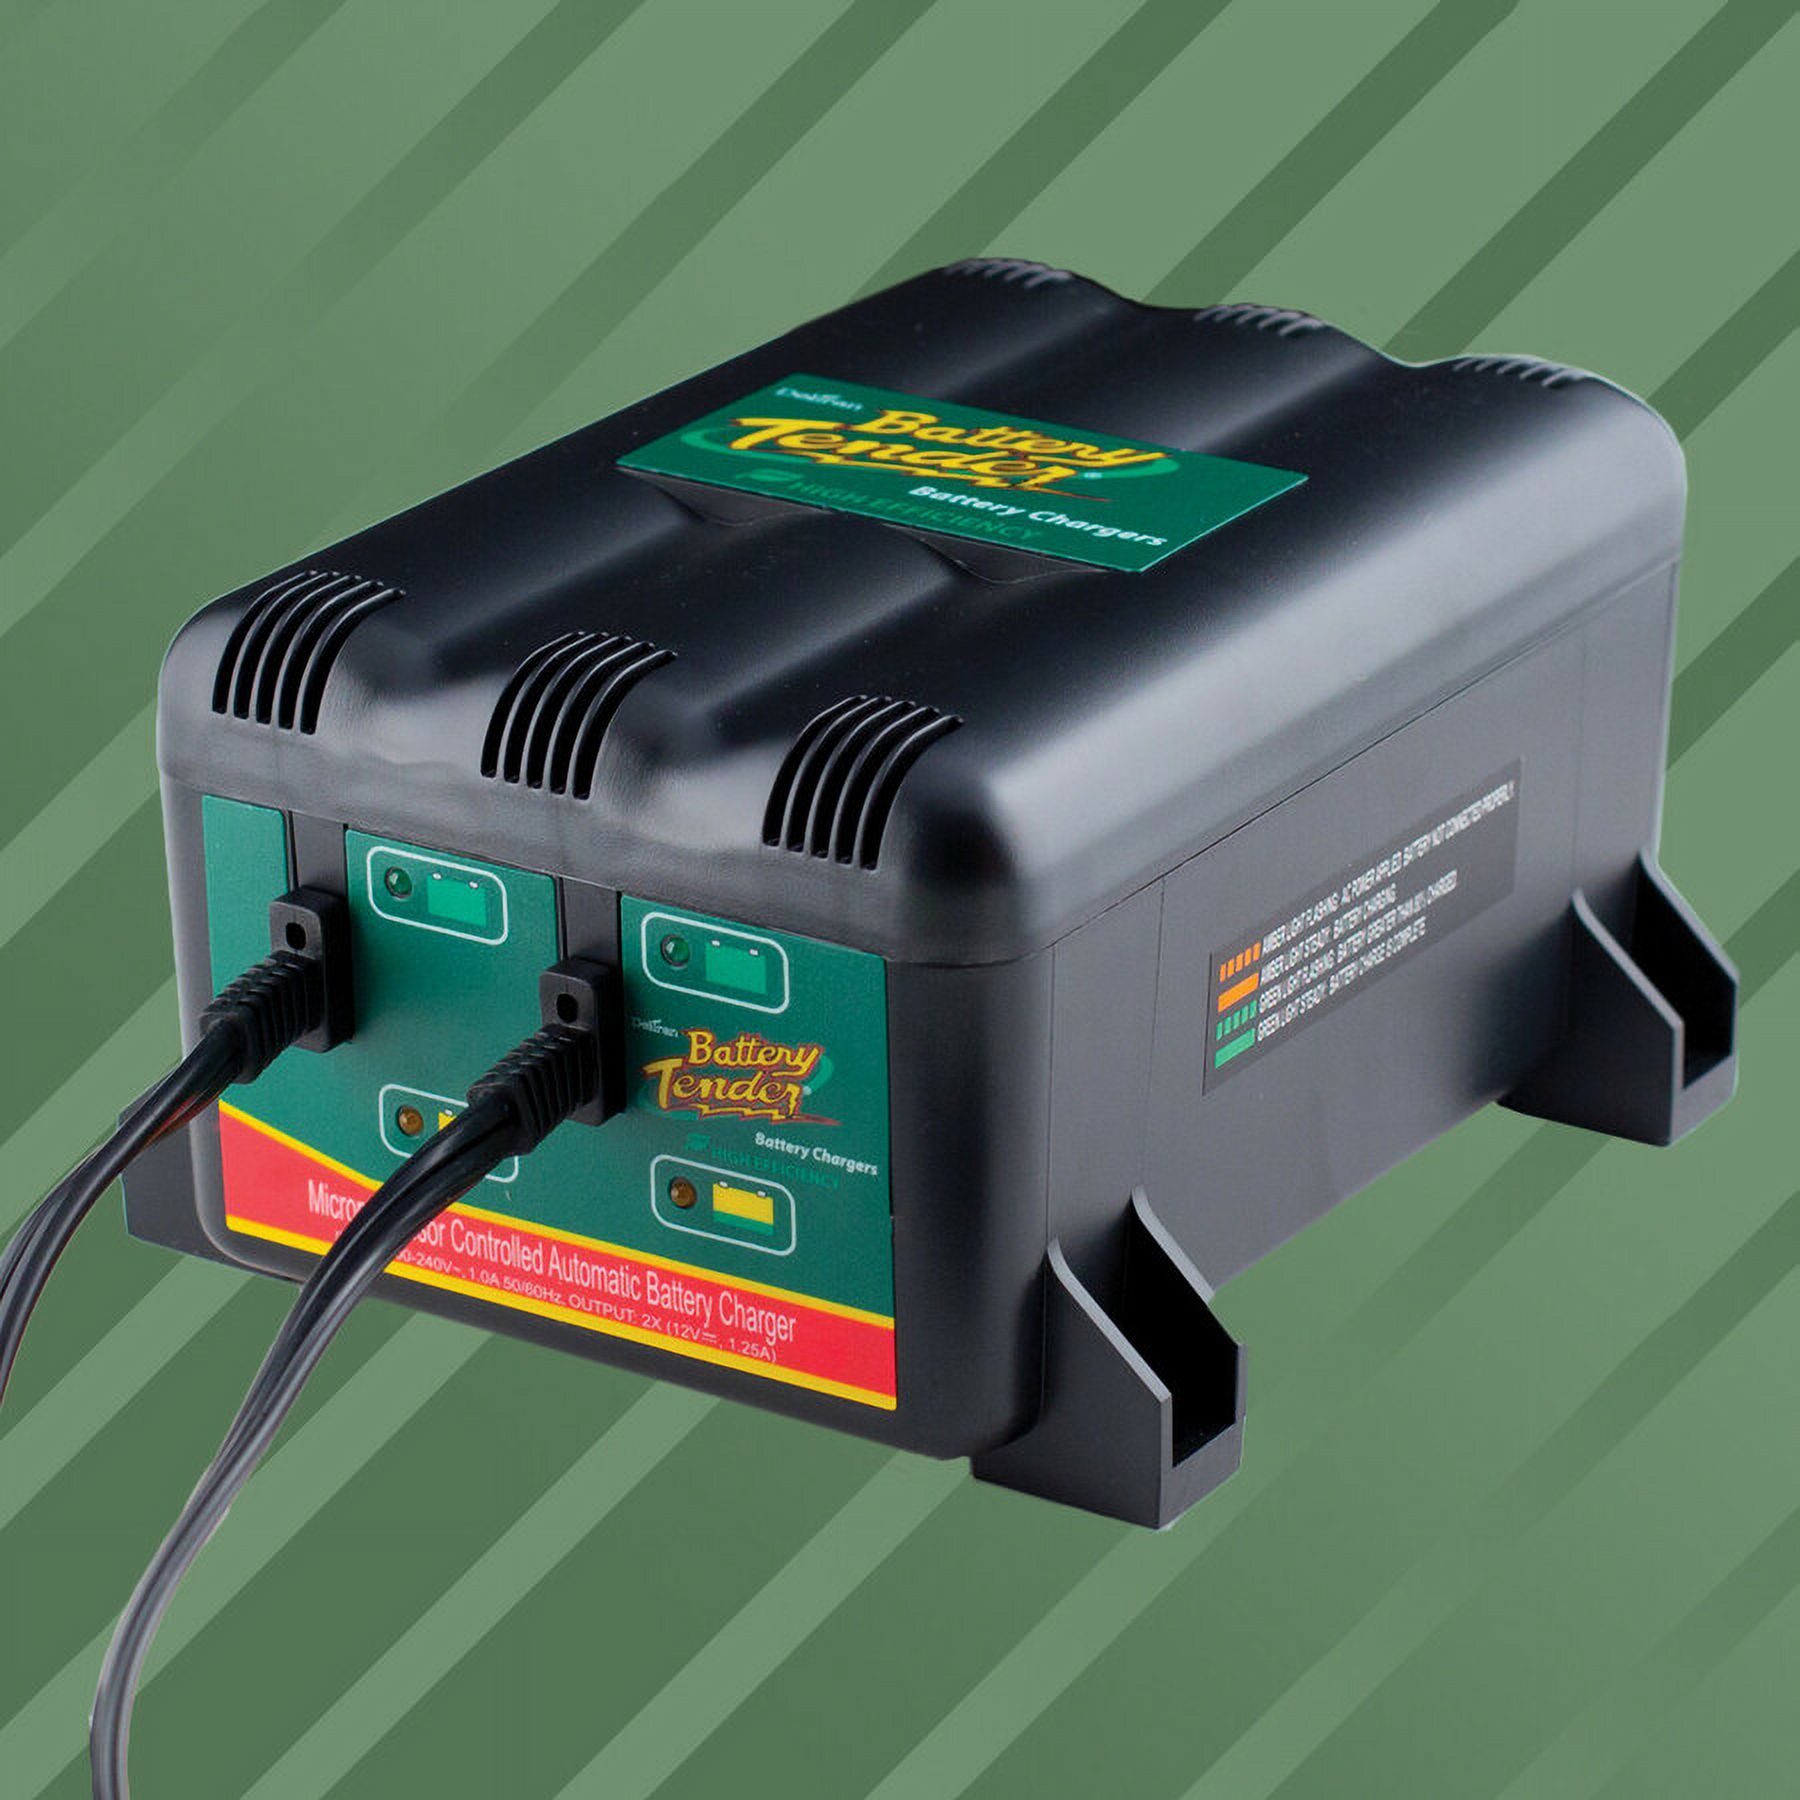 Battery Tender 2 Bank Multibank Charger - 2.5 AMP (1.25 AMPs Per Bank) - Smart 12V Multi Battery Charger and Maintainer  - 021-0165-DL-WH - image 2 of 3